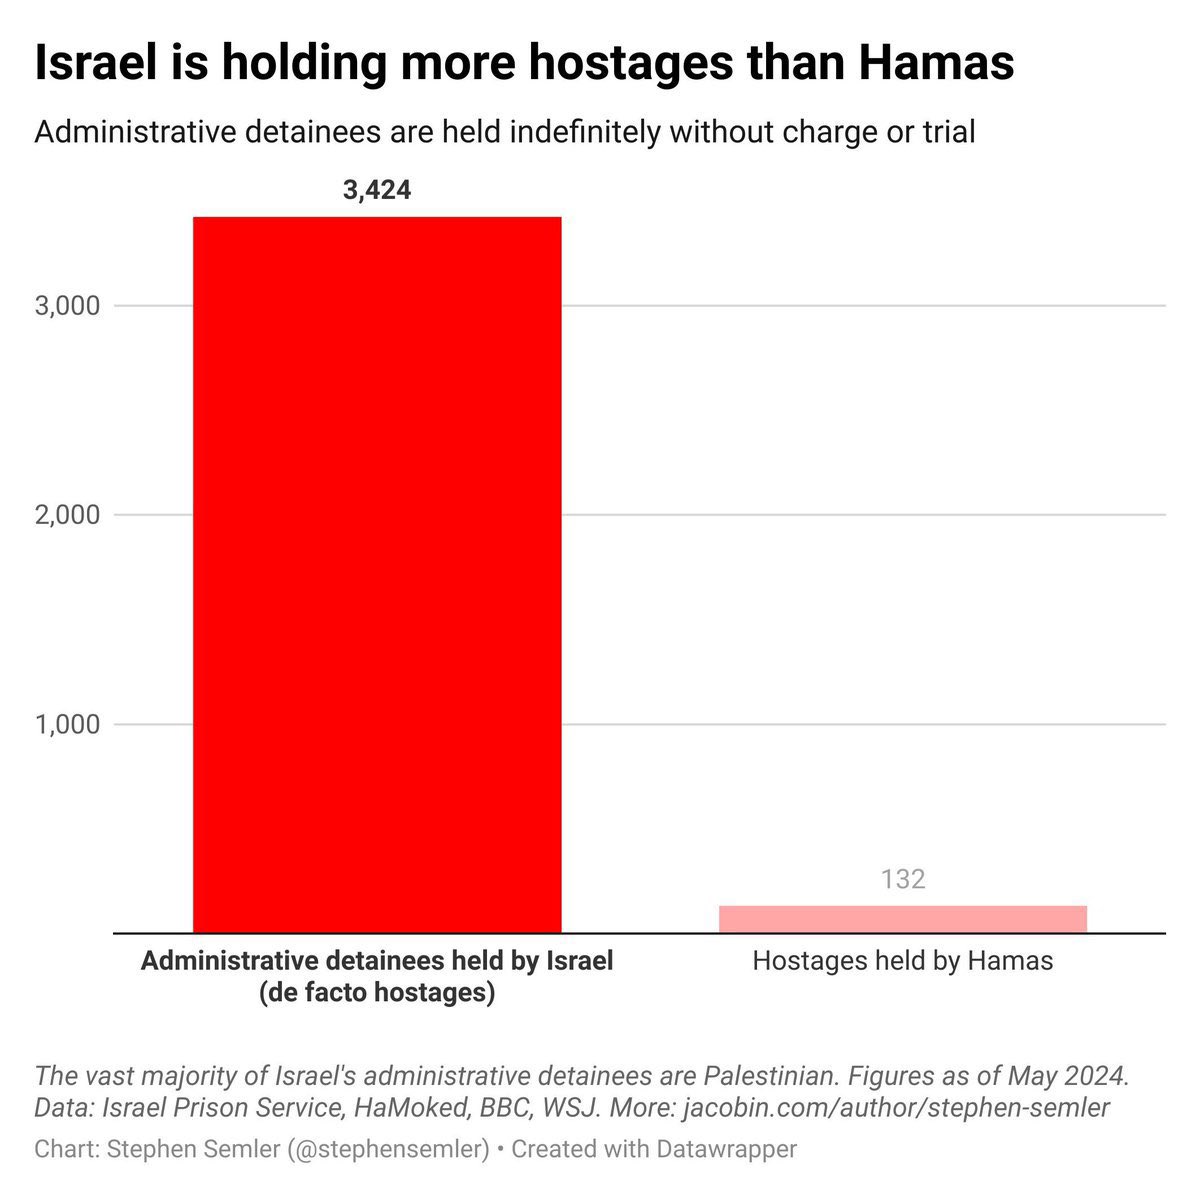 Israel has 26x more hostages than Hamas